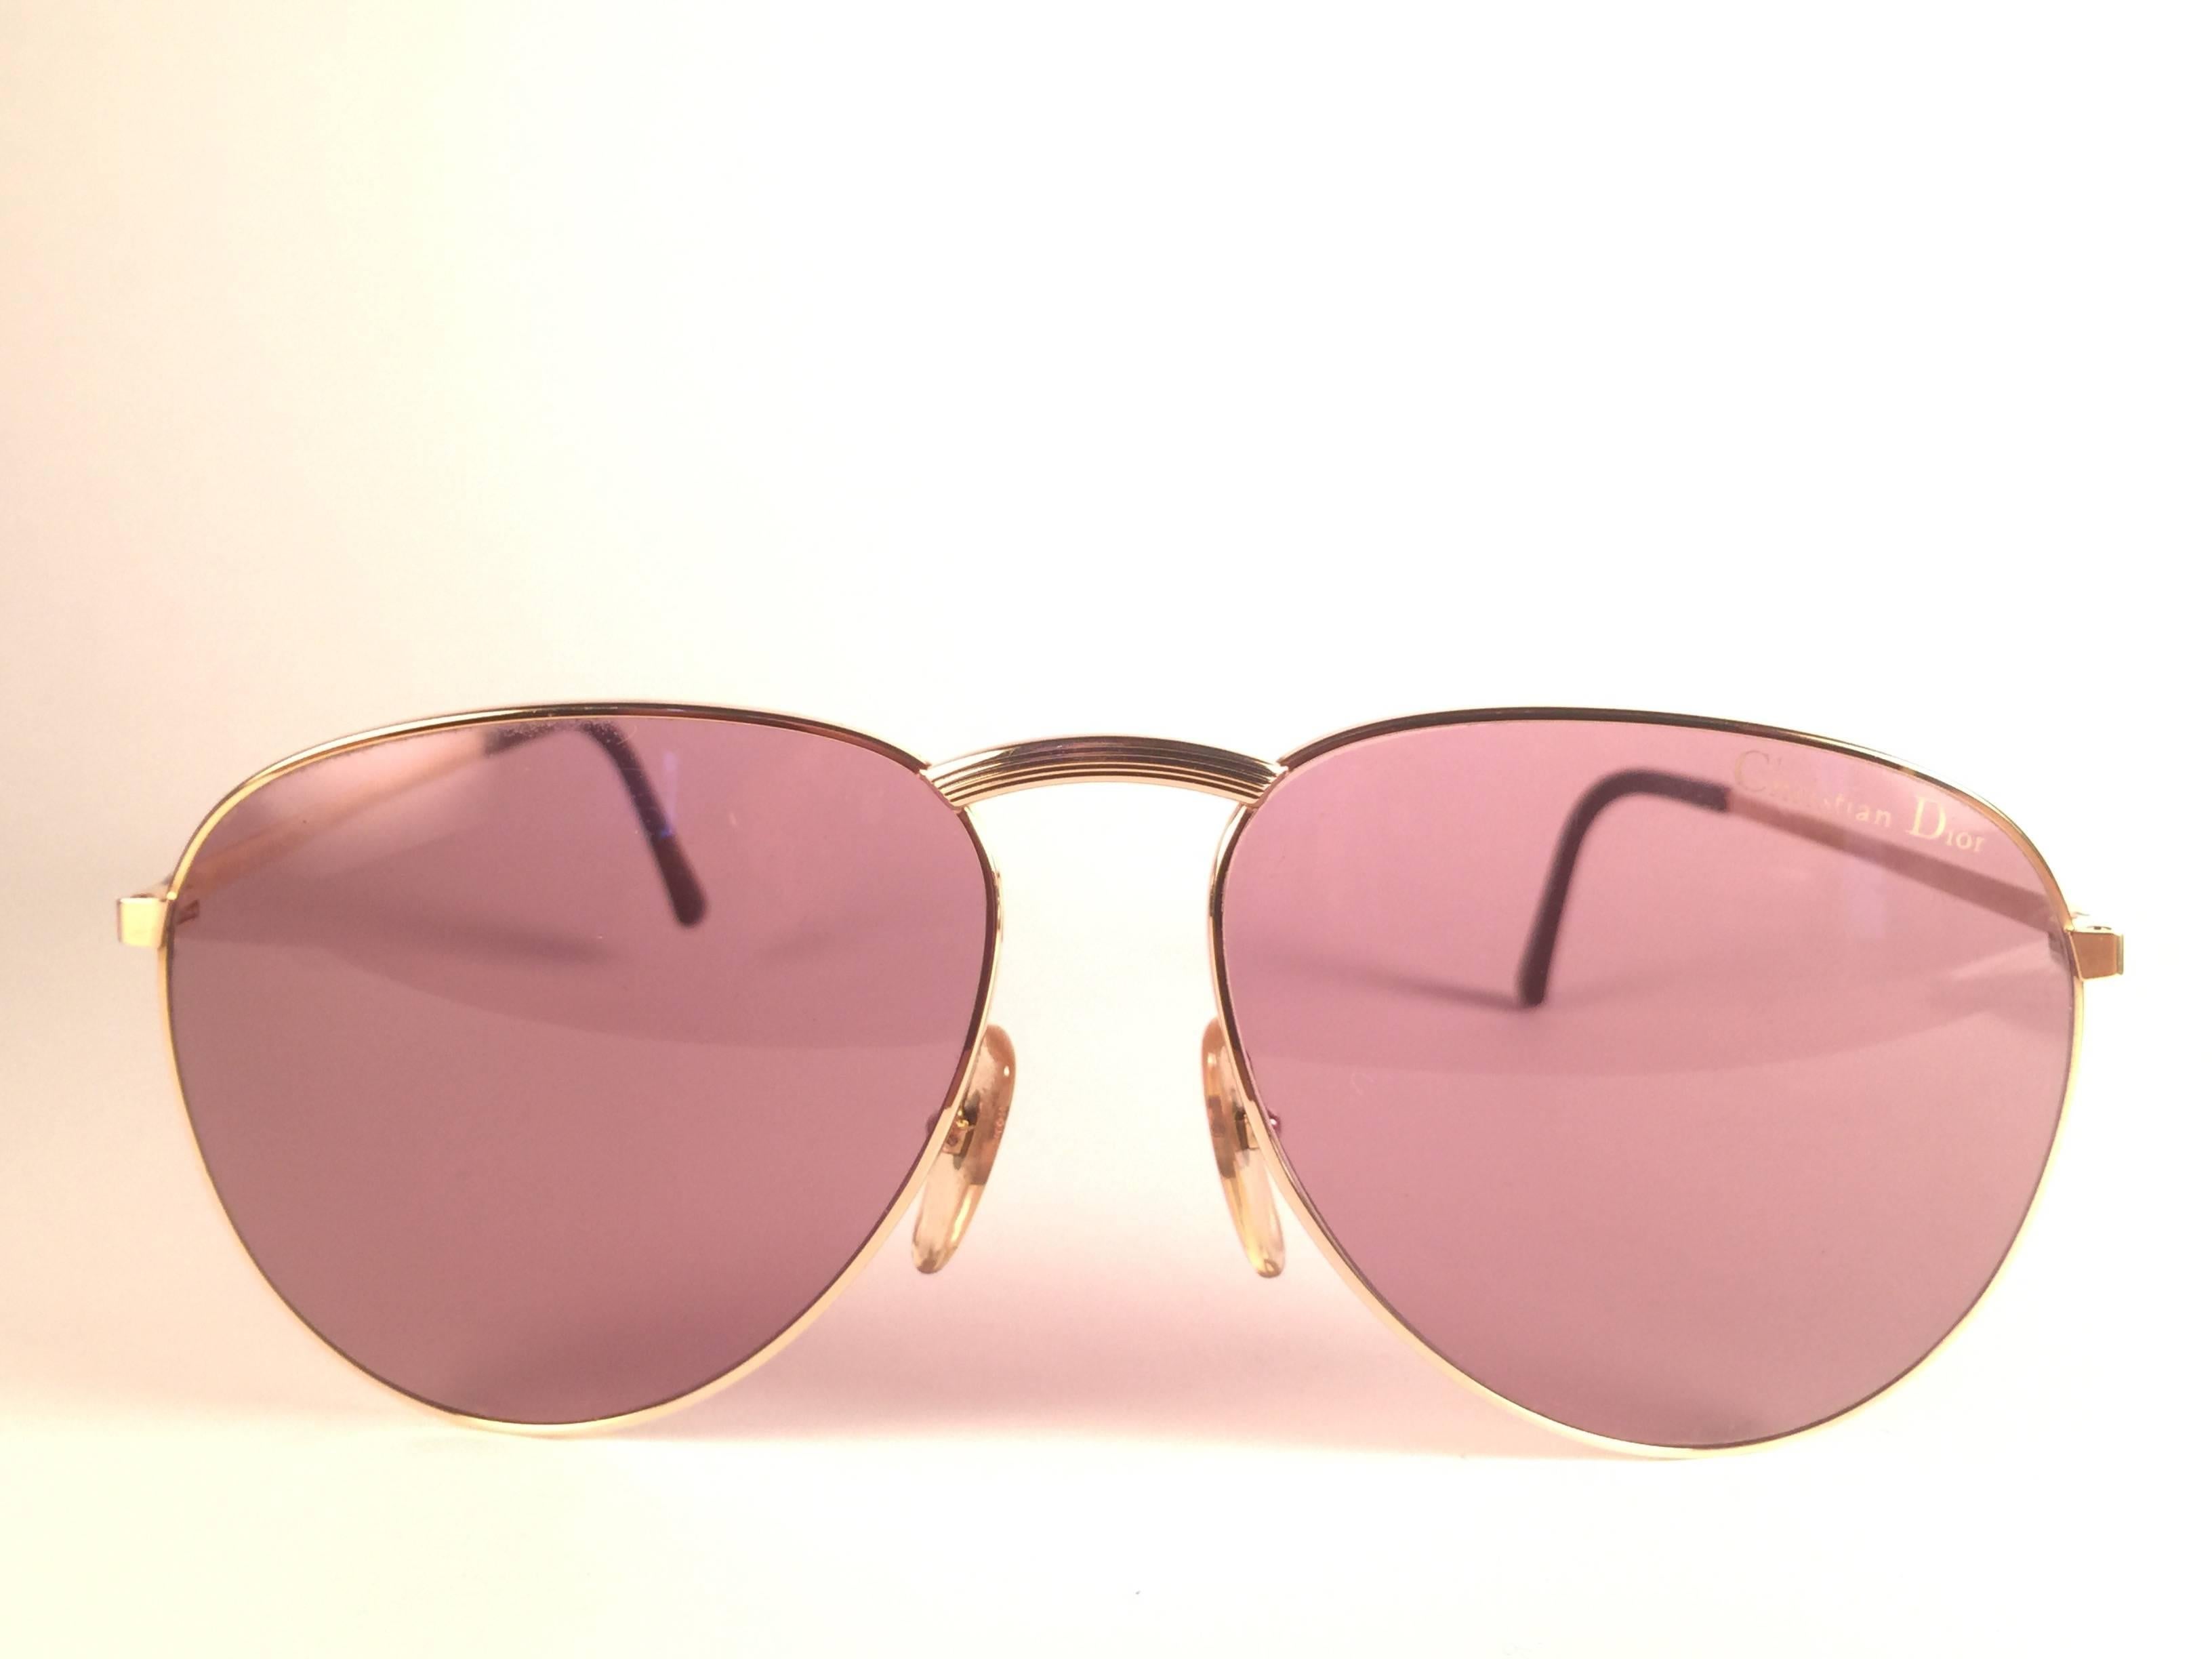 New Vintage Christian Dior 2252 40 Gold frame sunglasses with spotless light brown lenses. 
Designed and produced in the1980’s. Manufactured in Austria

New! never worn or displayed. Flawless pair!